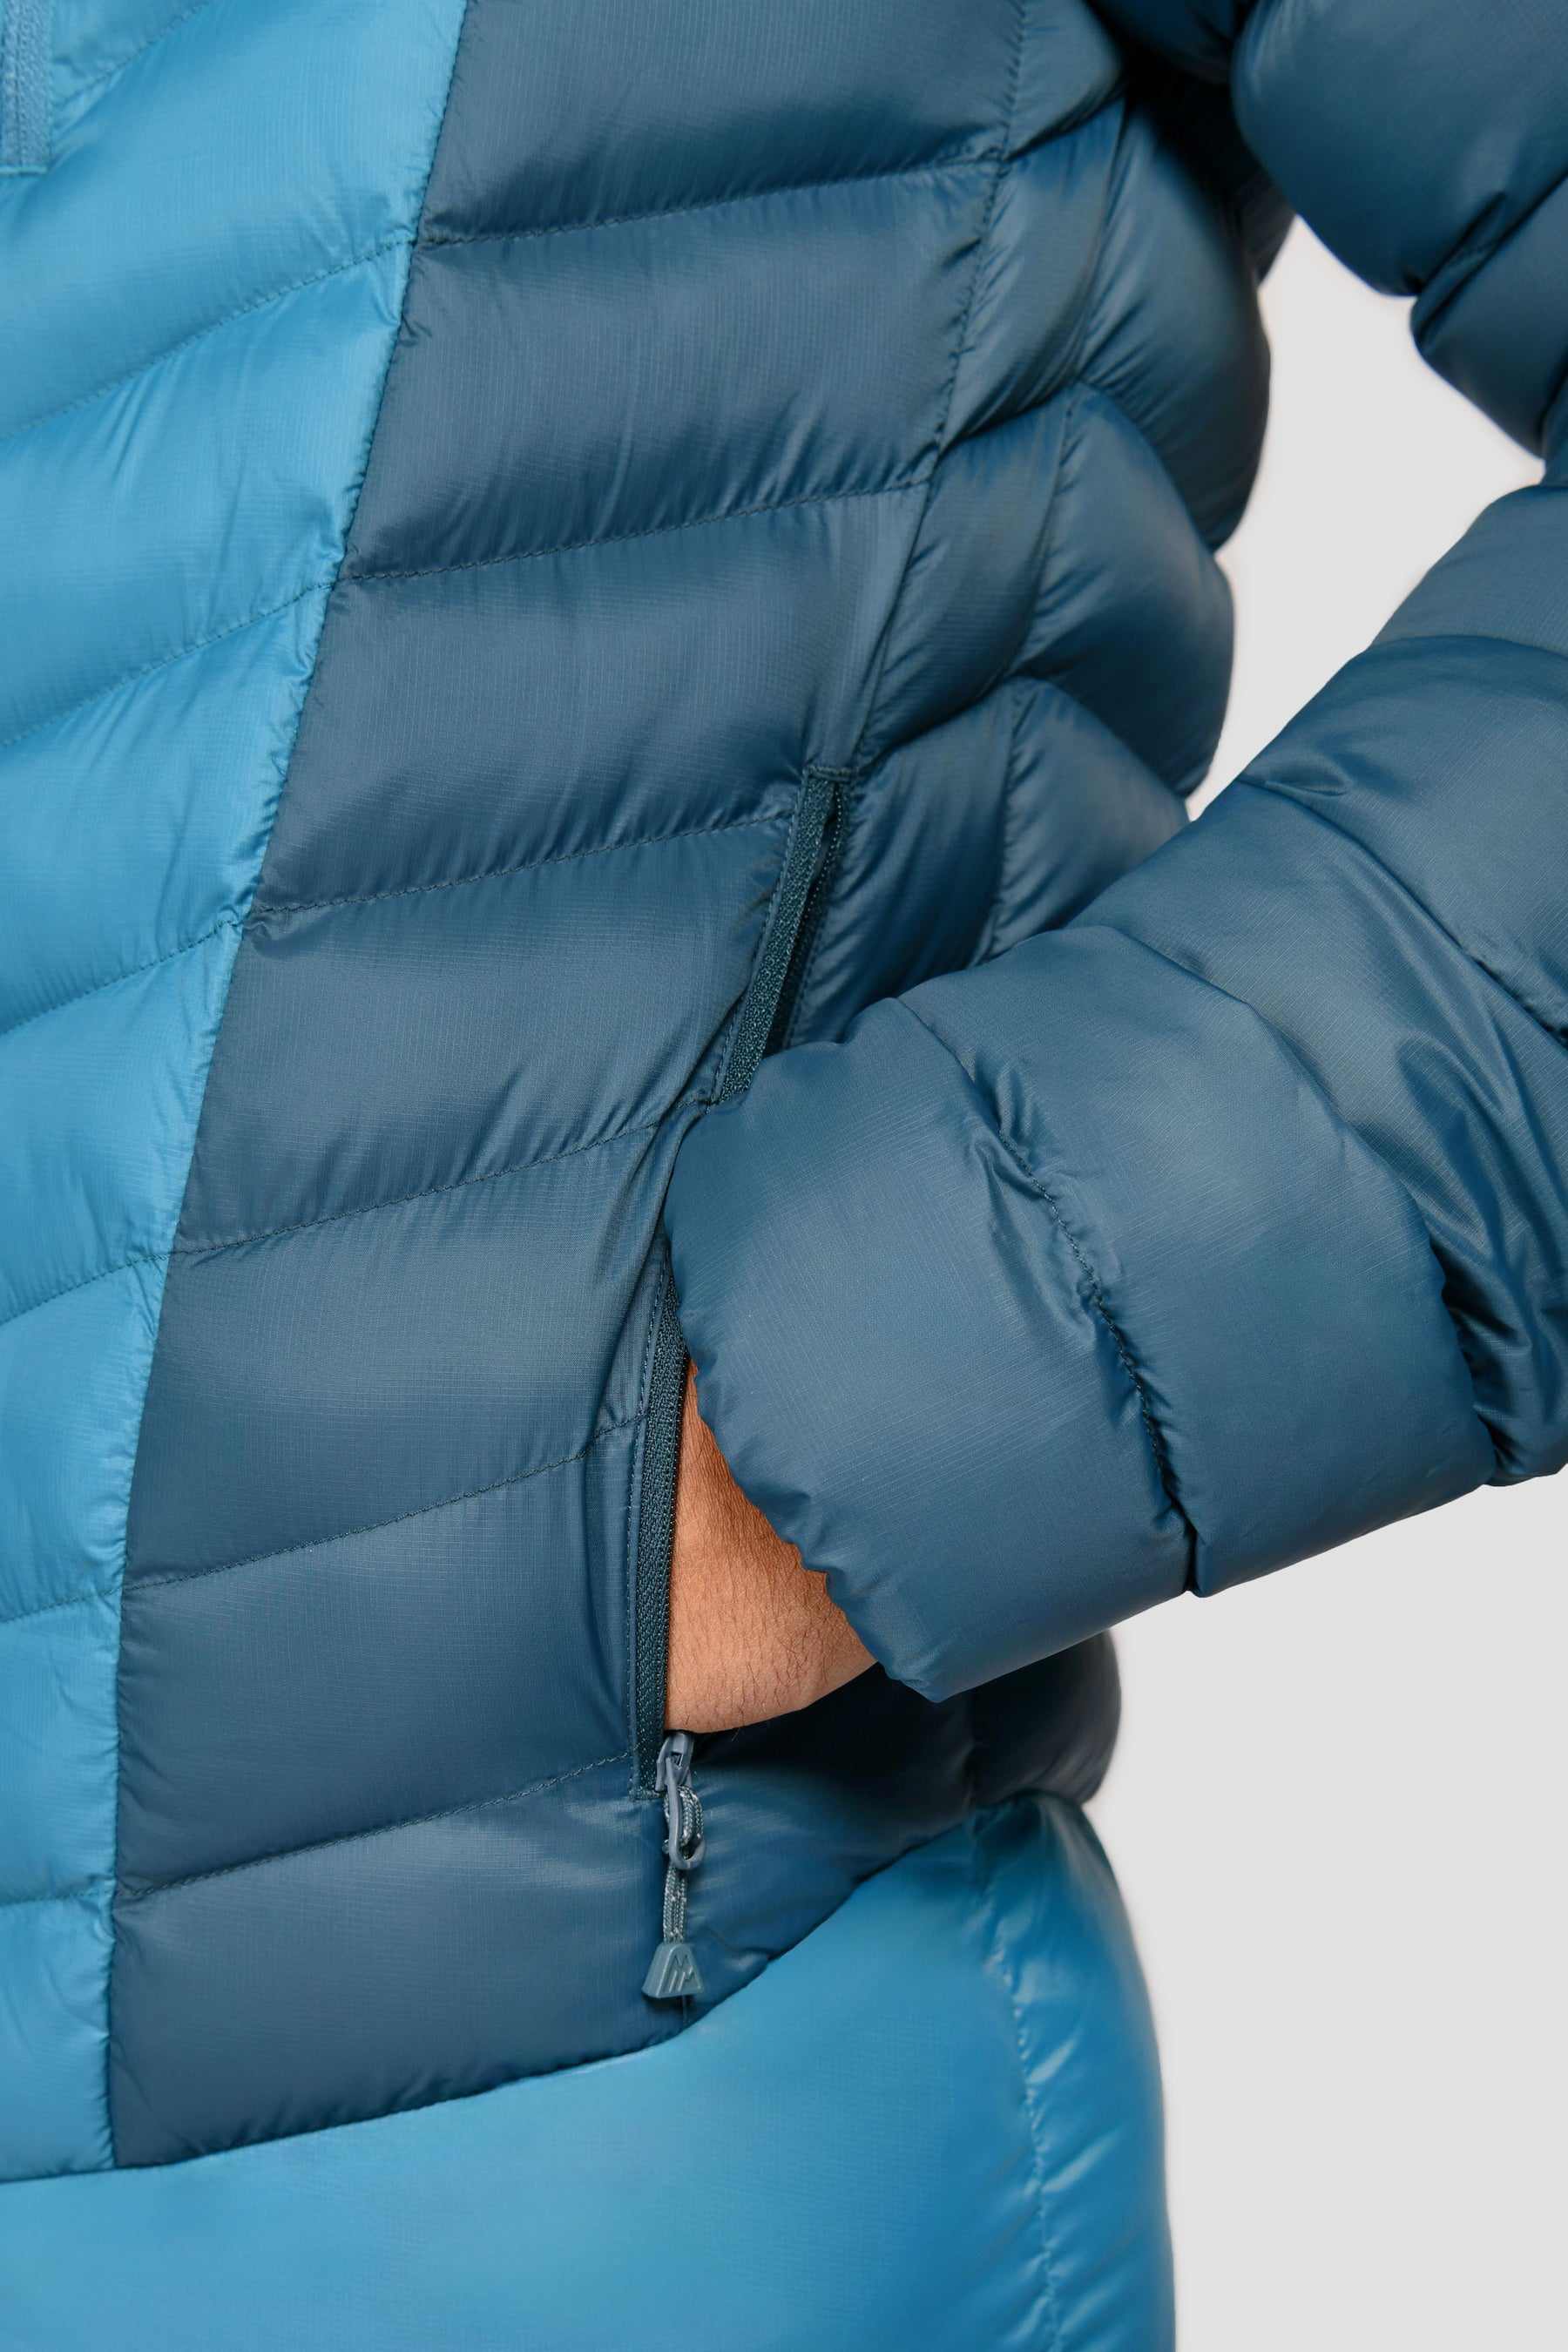 Stratus Synthetic Jacket - Duck Blue/Deep Pond